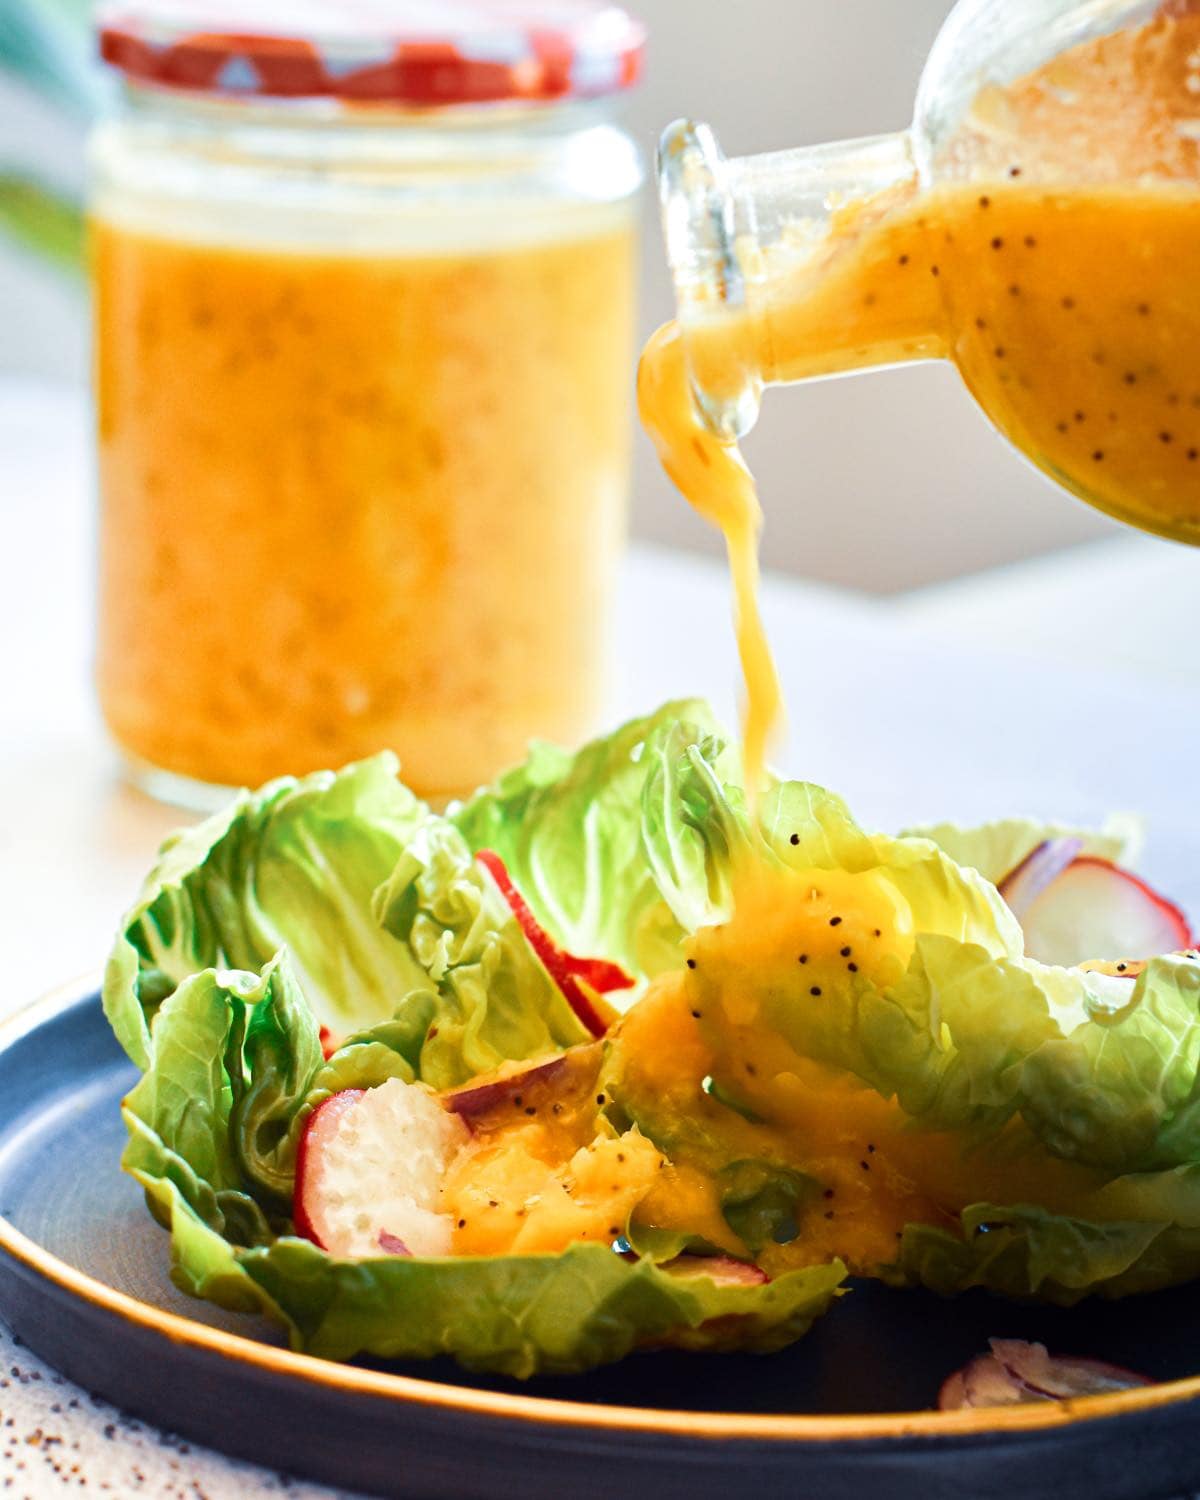 Easy Kumquat Poppyseed Vinaigrette packs a punch with it's sweet and tarte flavor. Here's how to make this light, and tangy salad dressing.